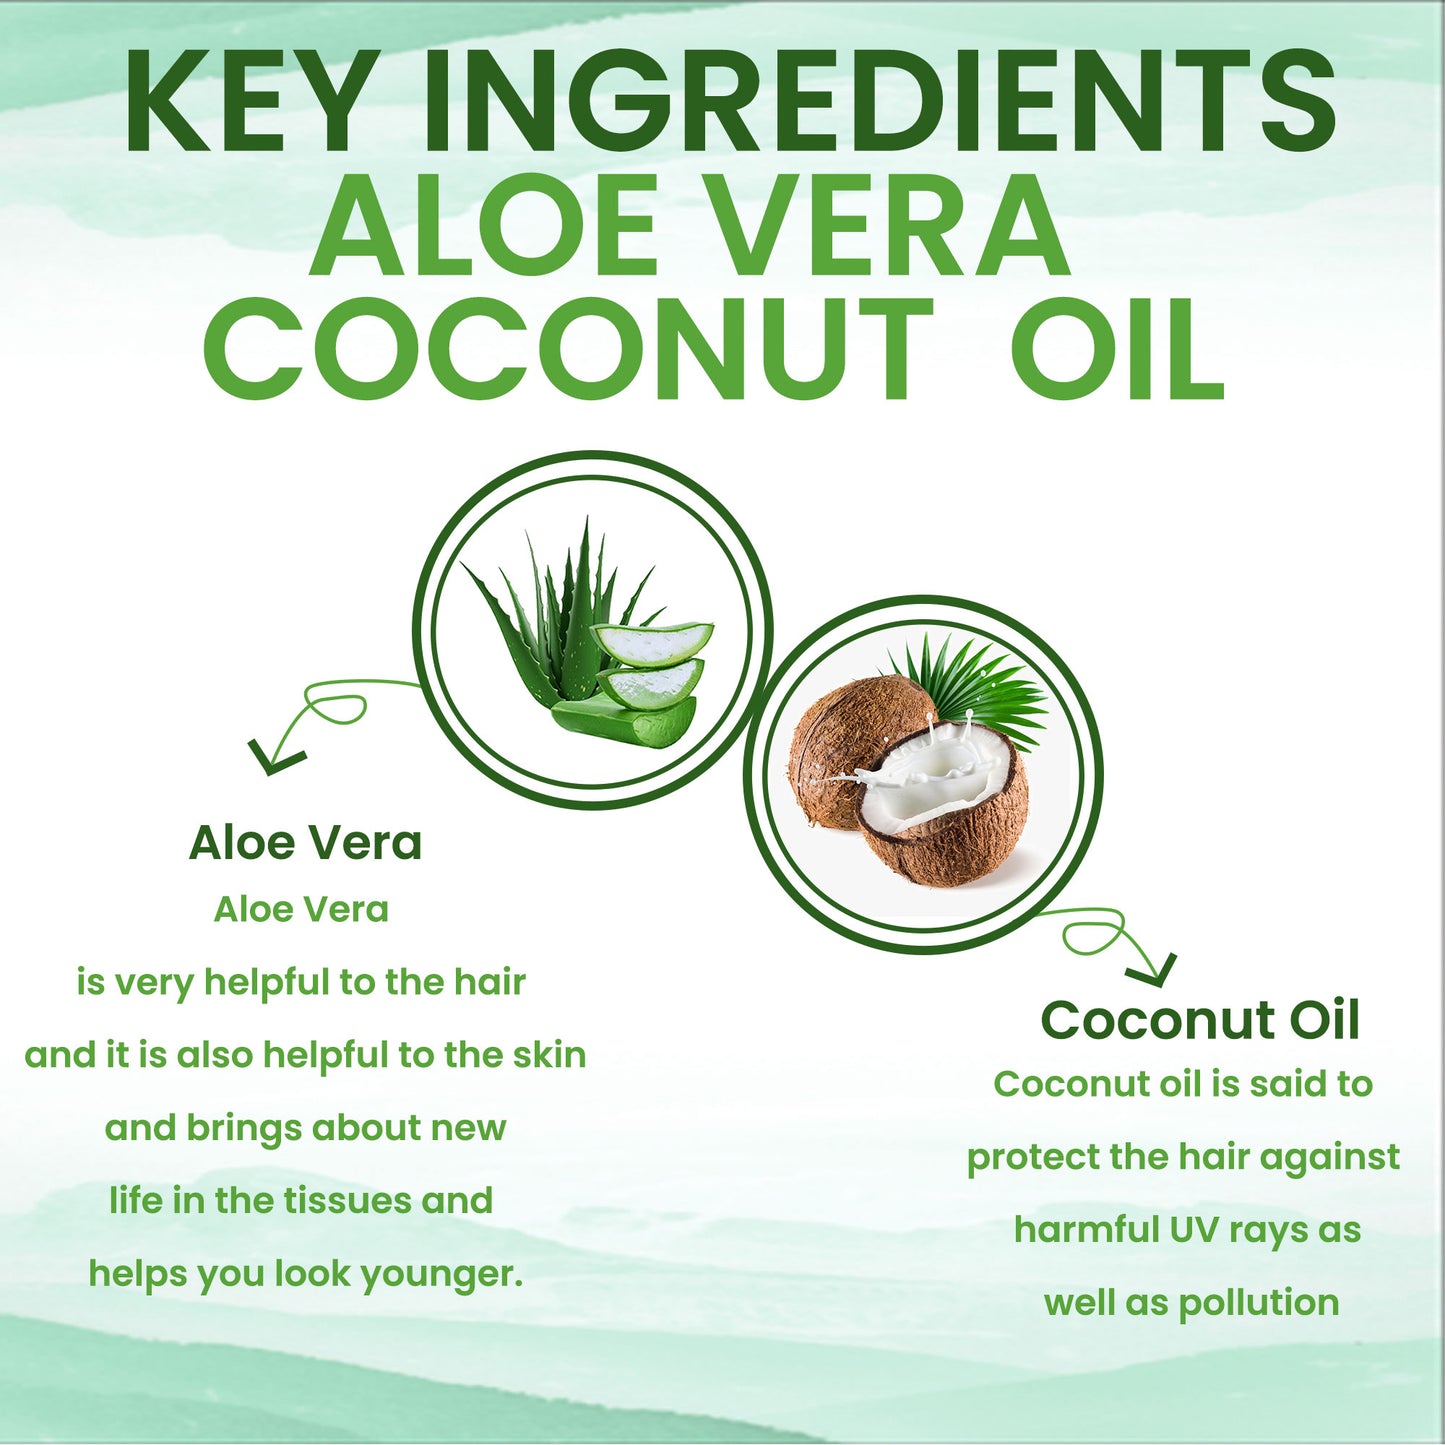 Aloe Vera Coconut Hair Oil (200 ml) With Natural Herb Extracts